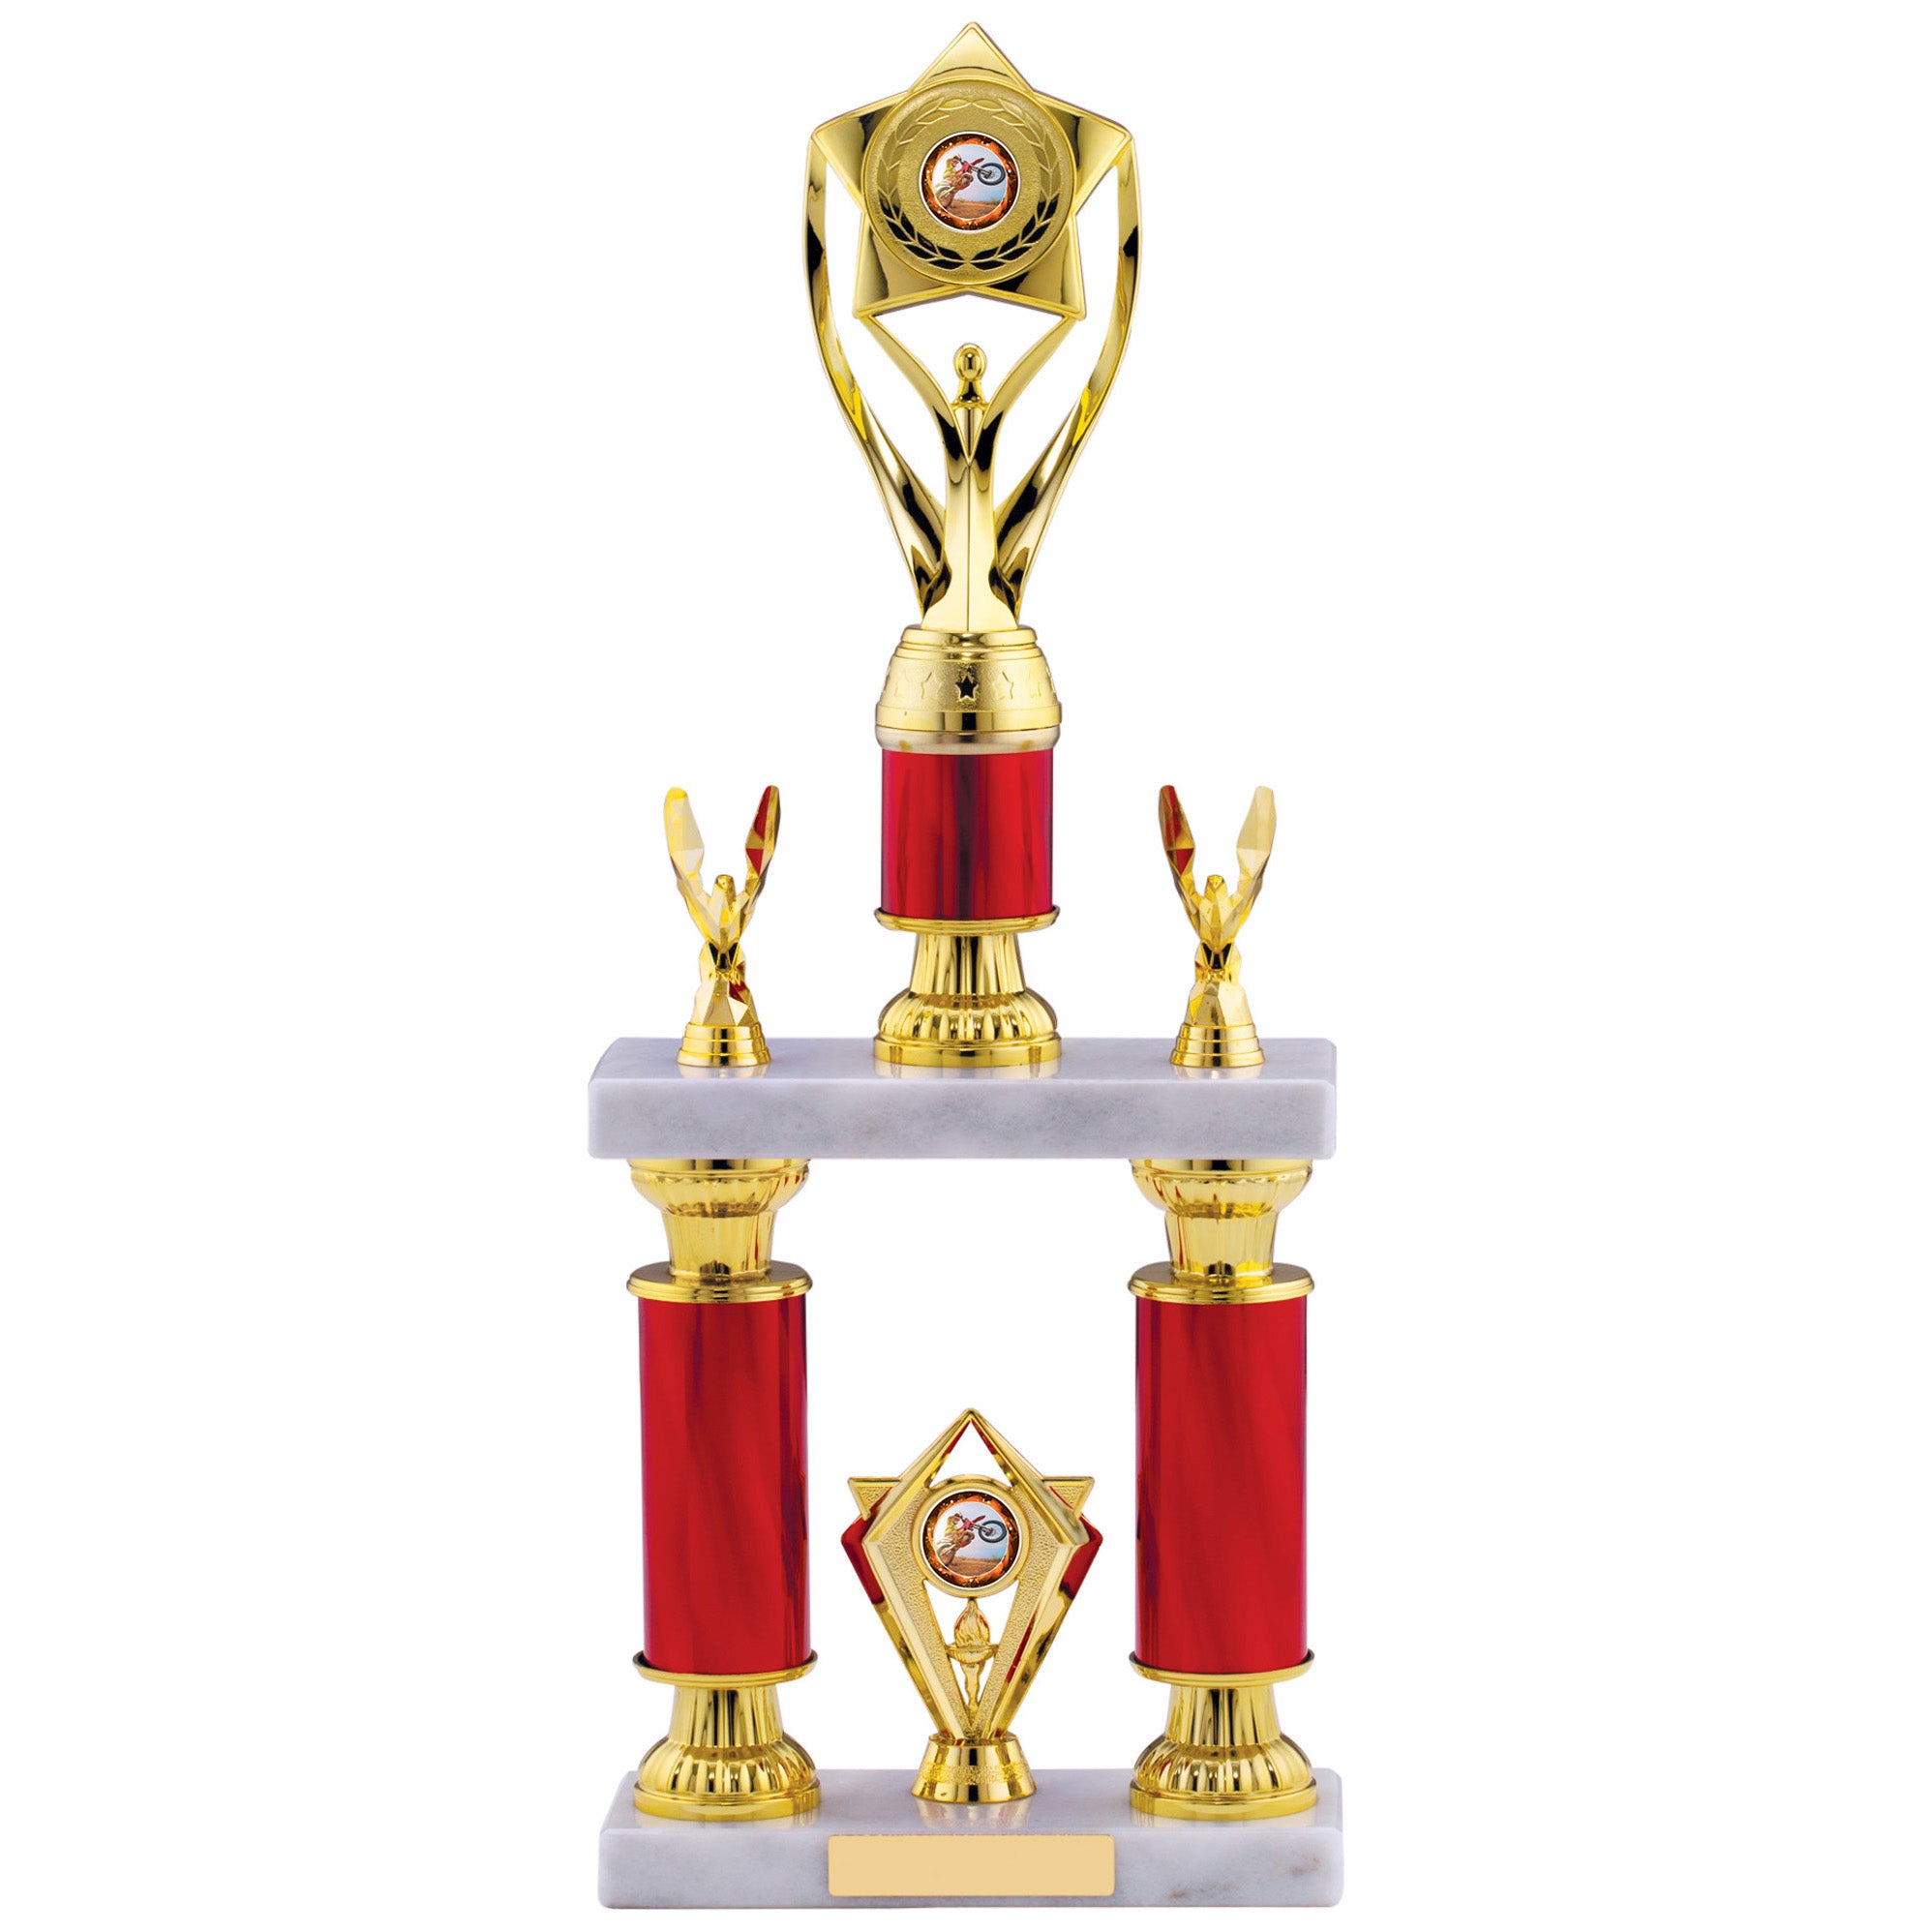 Two-Tier Retro Red Tube Column Trophy